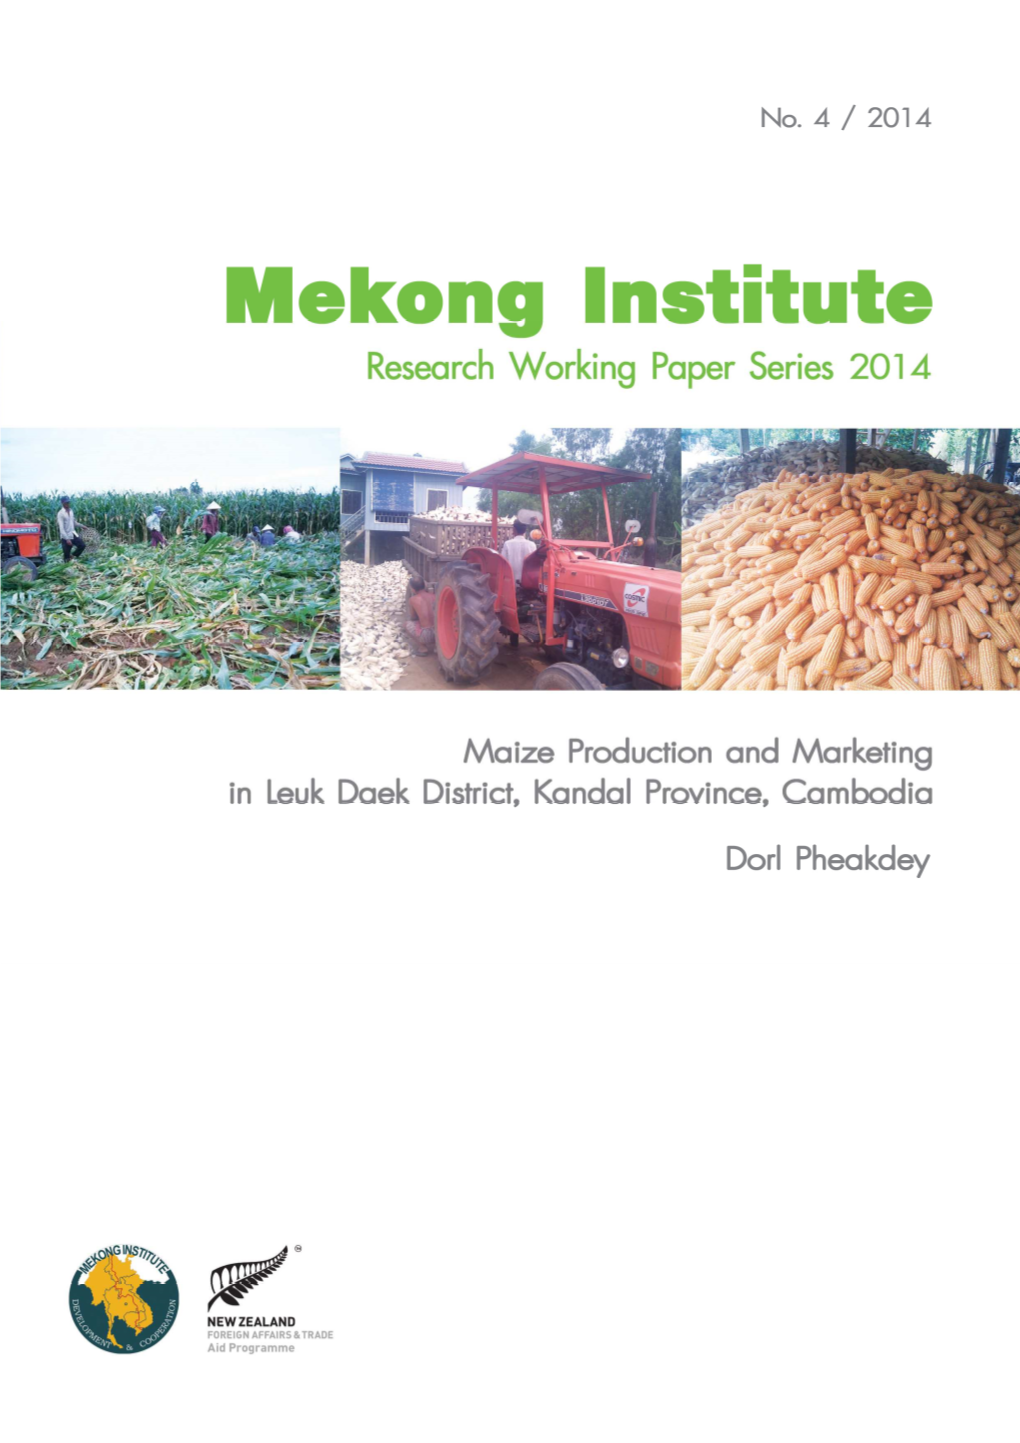 Maize Production and Marketing in Leuk Daek District, Kandal Province, Cambodia